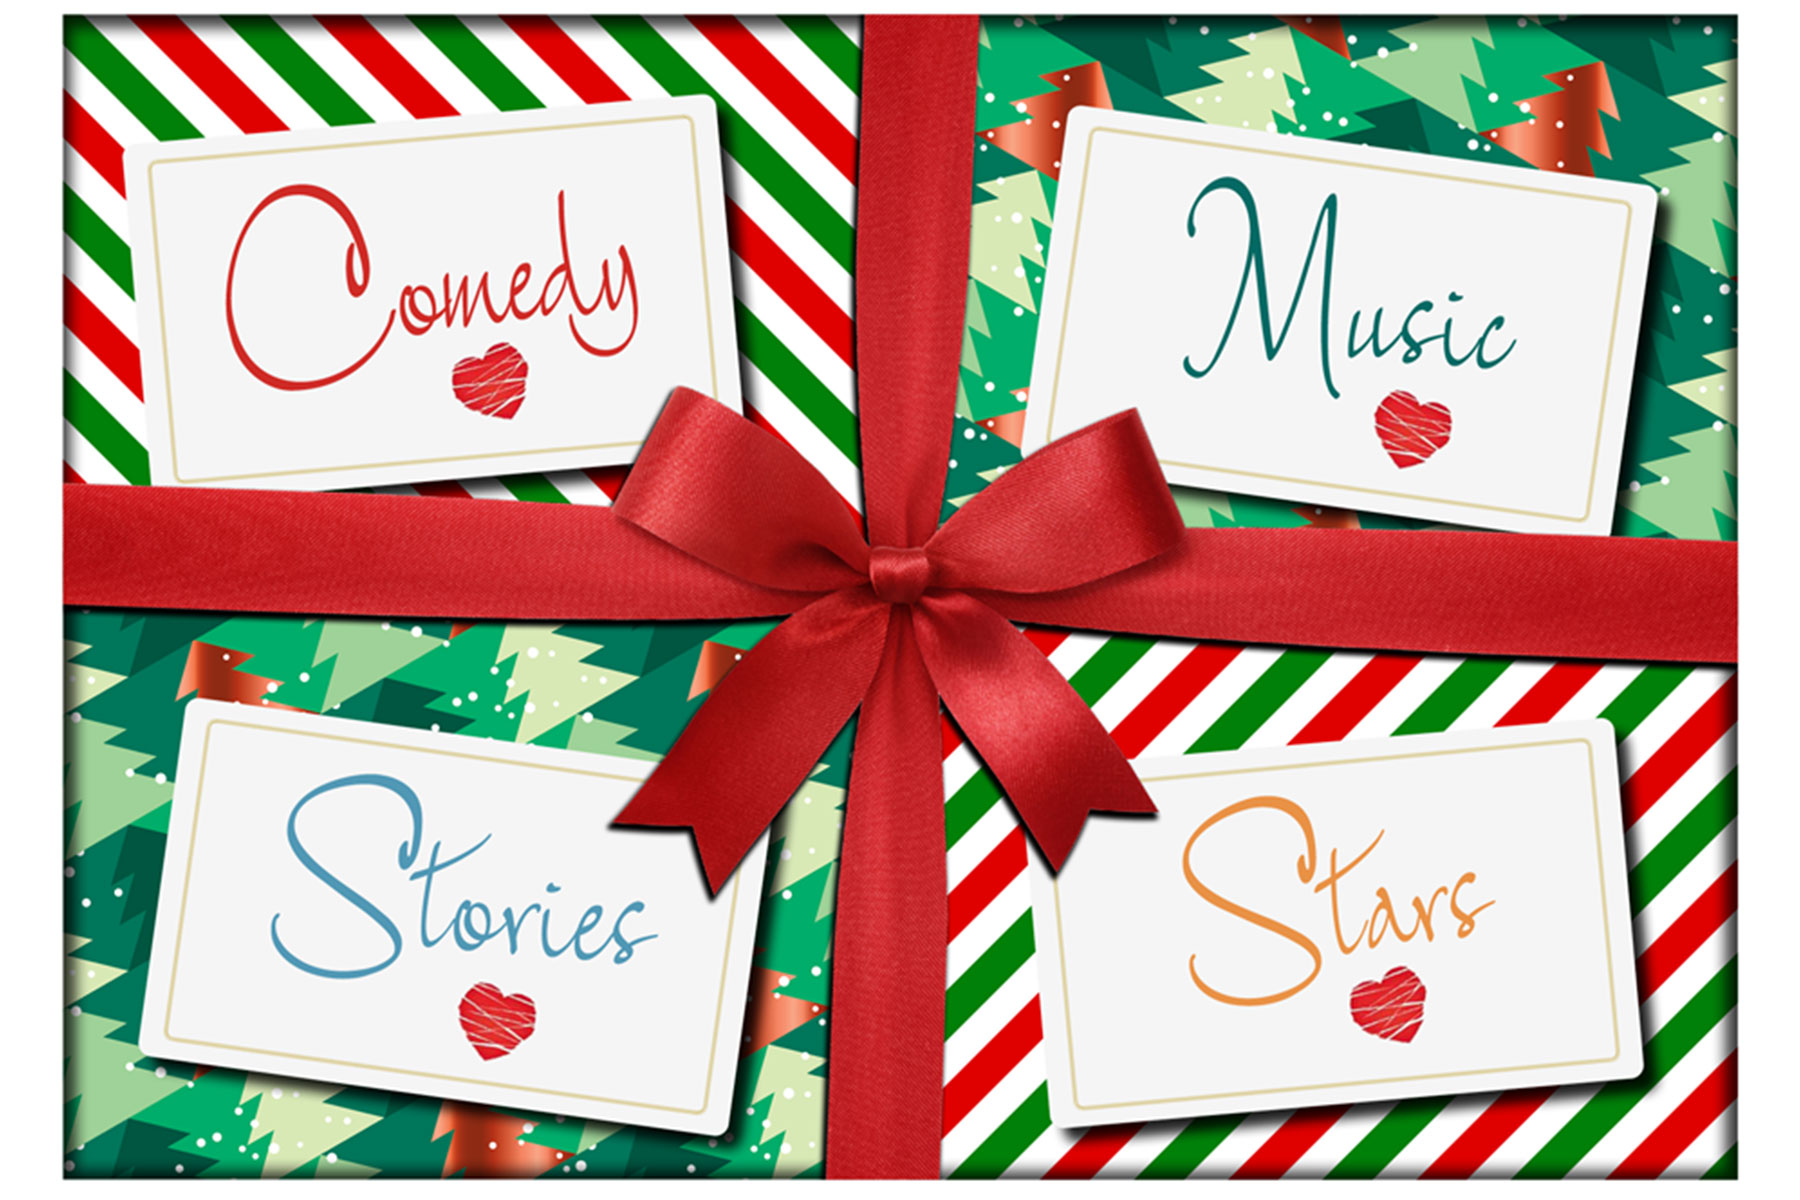 Artwork of a Christmas present with four labels: Comedy, Music, Stories and Stars